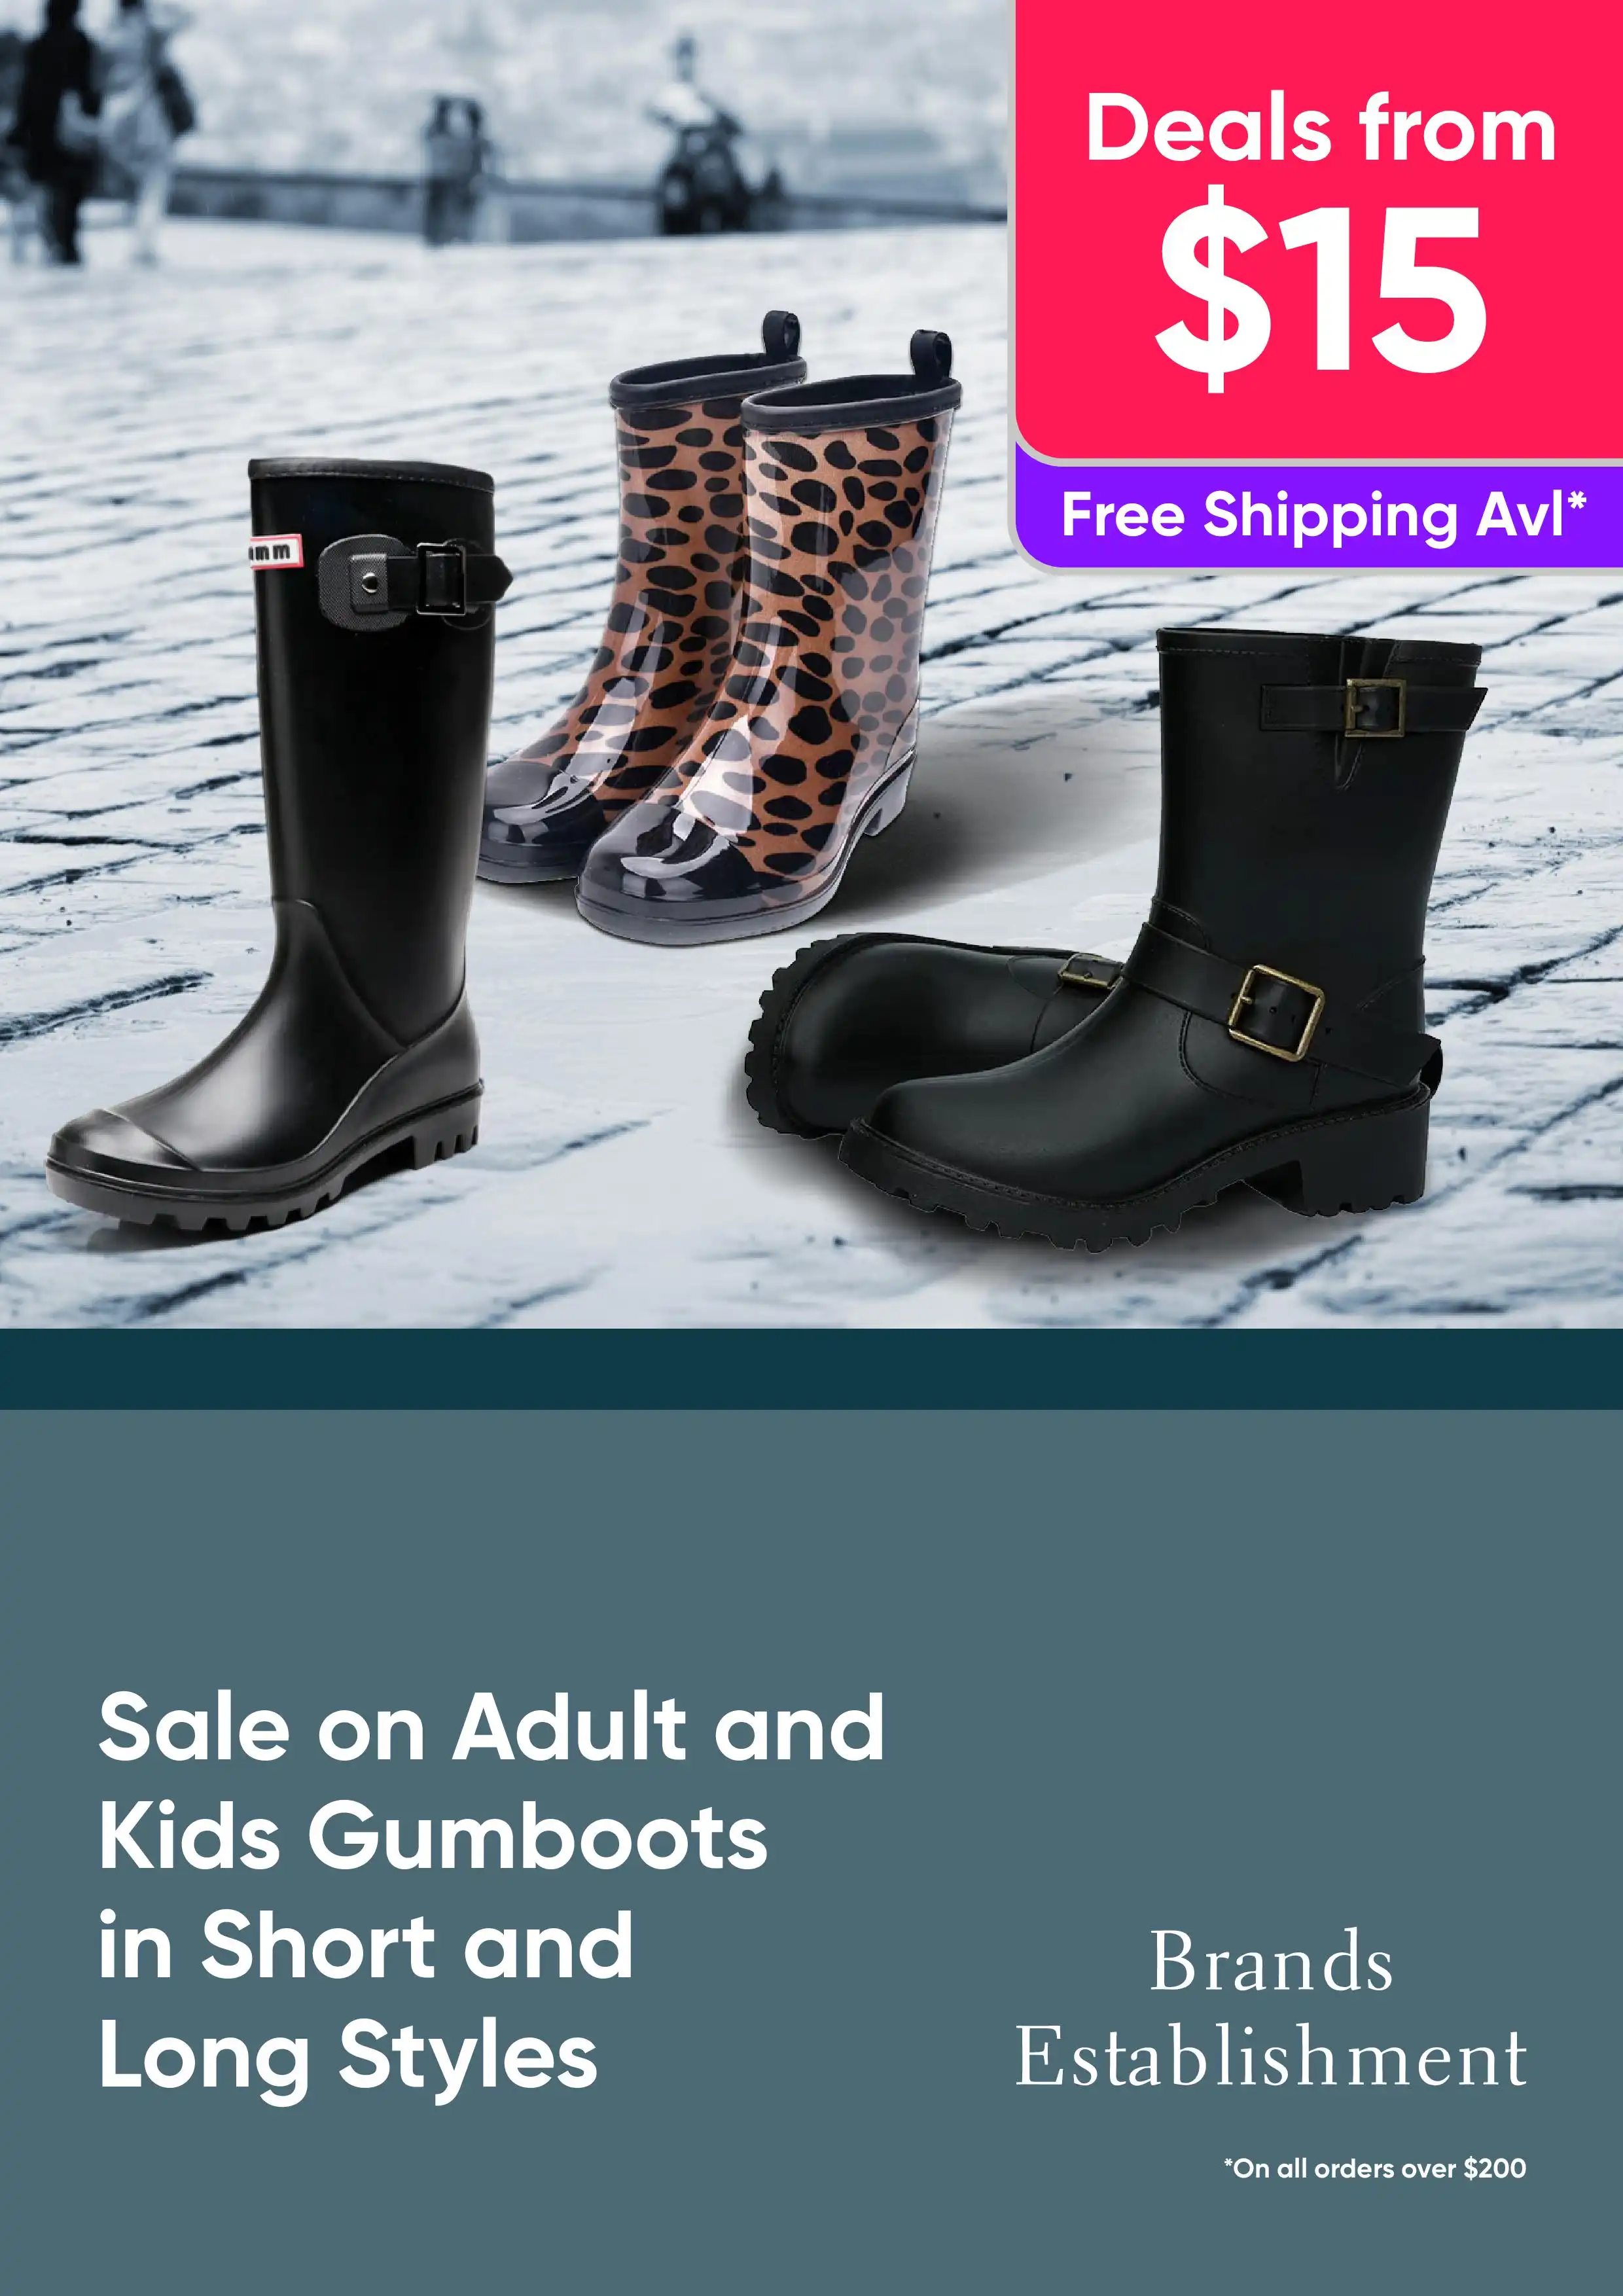 From $15 for a Range of Adult and Kids Gumboots in Short and Long Styles